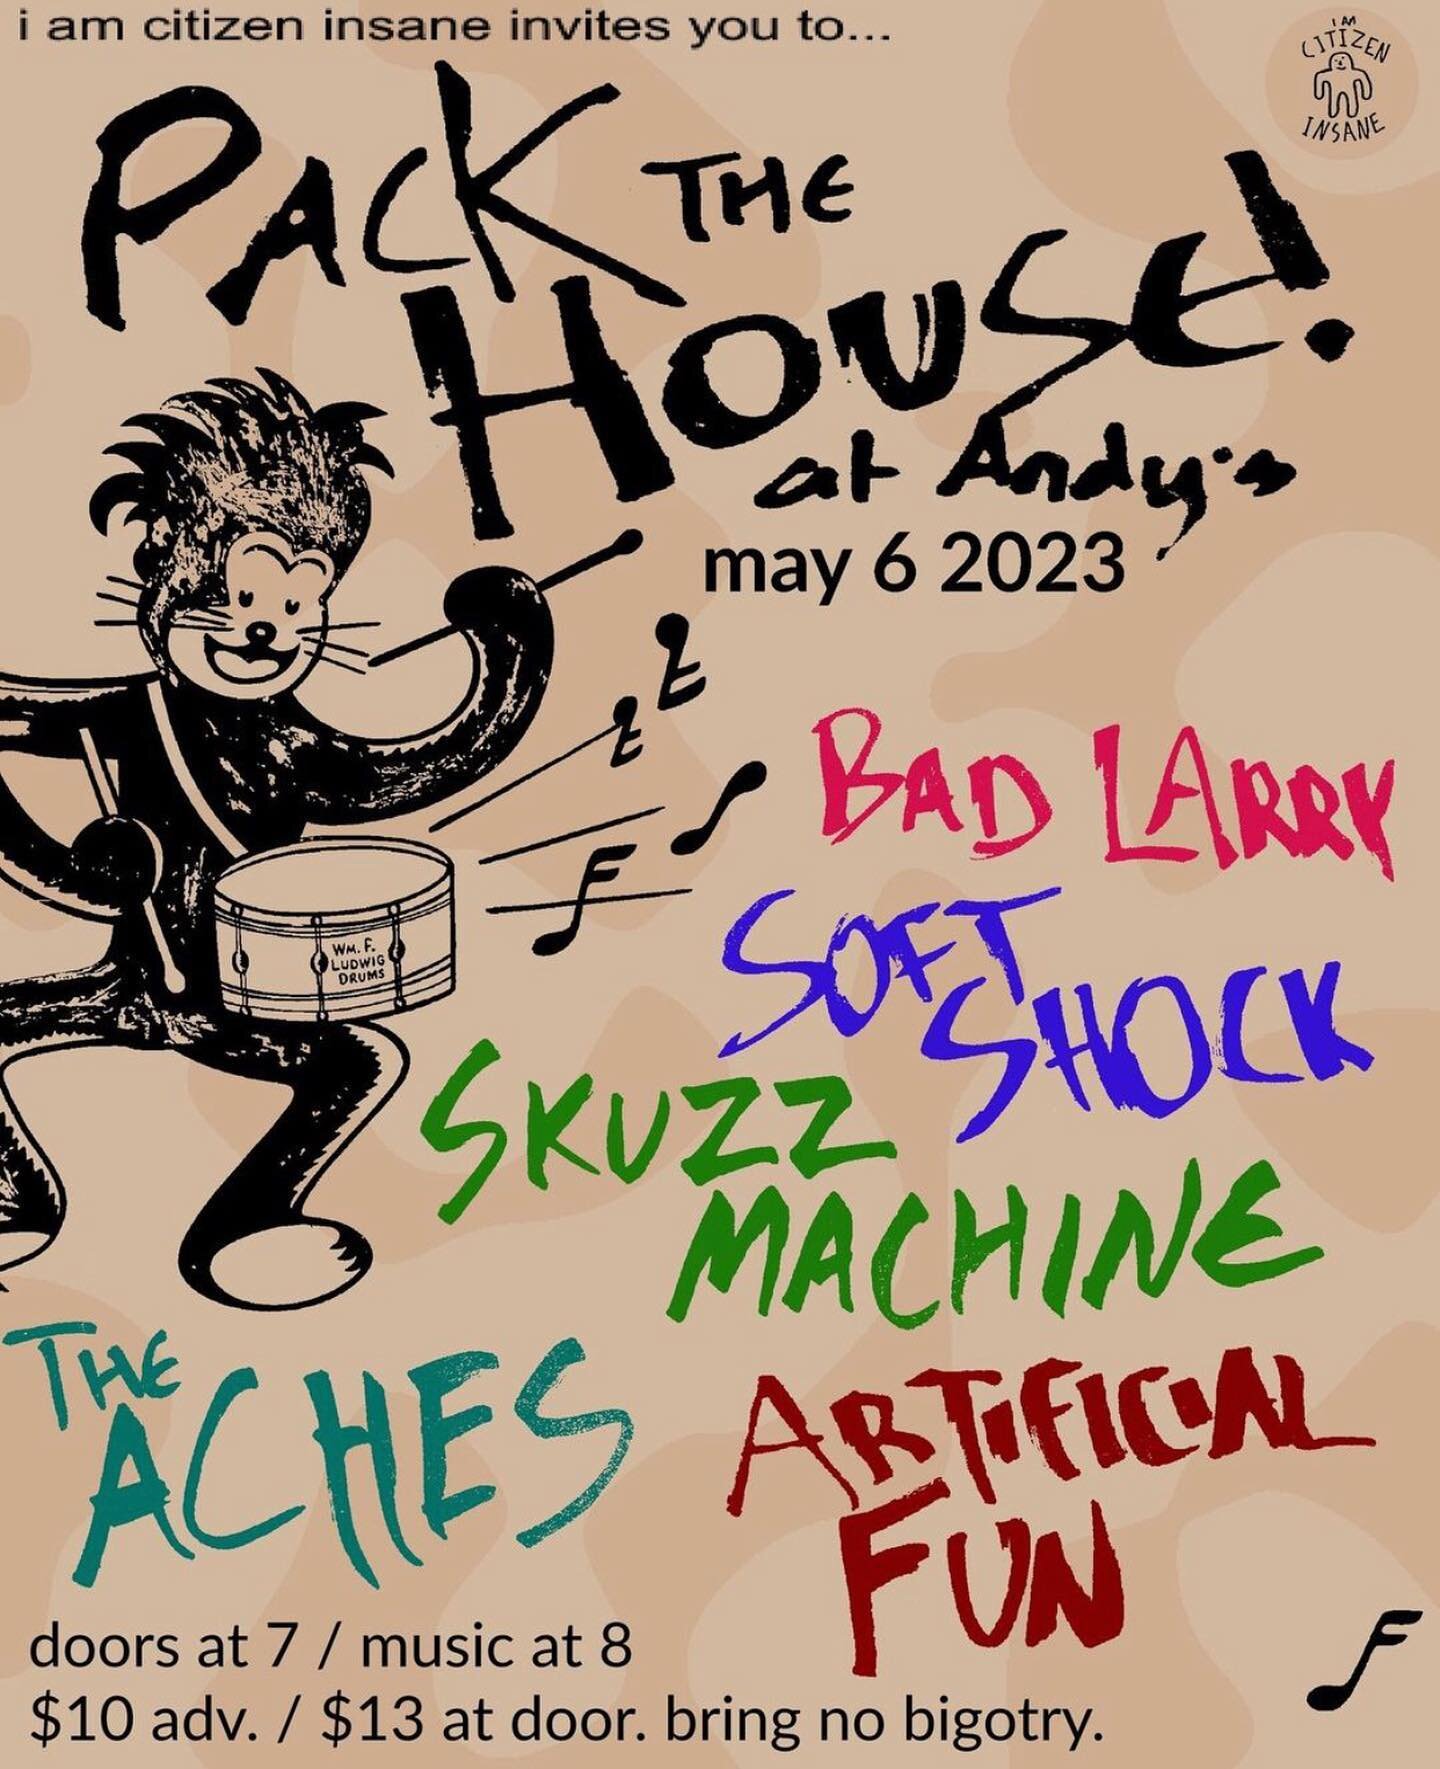 This one is a while away... but that means you have plenty of time to prepare!!! 

COME SUPPORT LOCAL MUSIC AT ANDYS THIS MAY!

MAY 6TH AT ANDYS! @i.am.citizen_insane is hosting this killer lineup! 

@badlarrytx 
@softshock_theband 
@skuzzmachineband